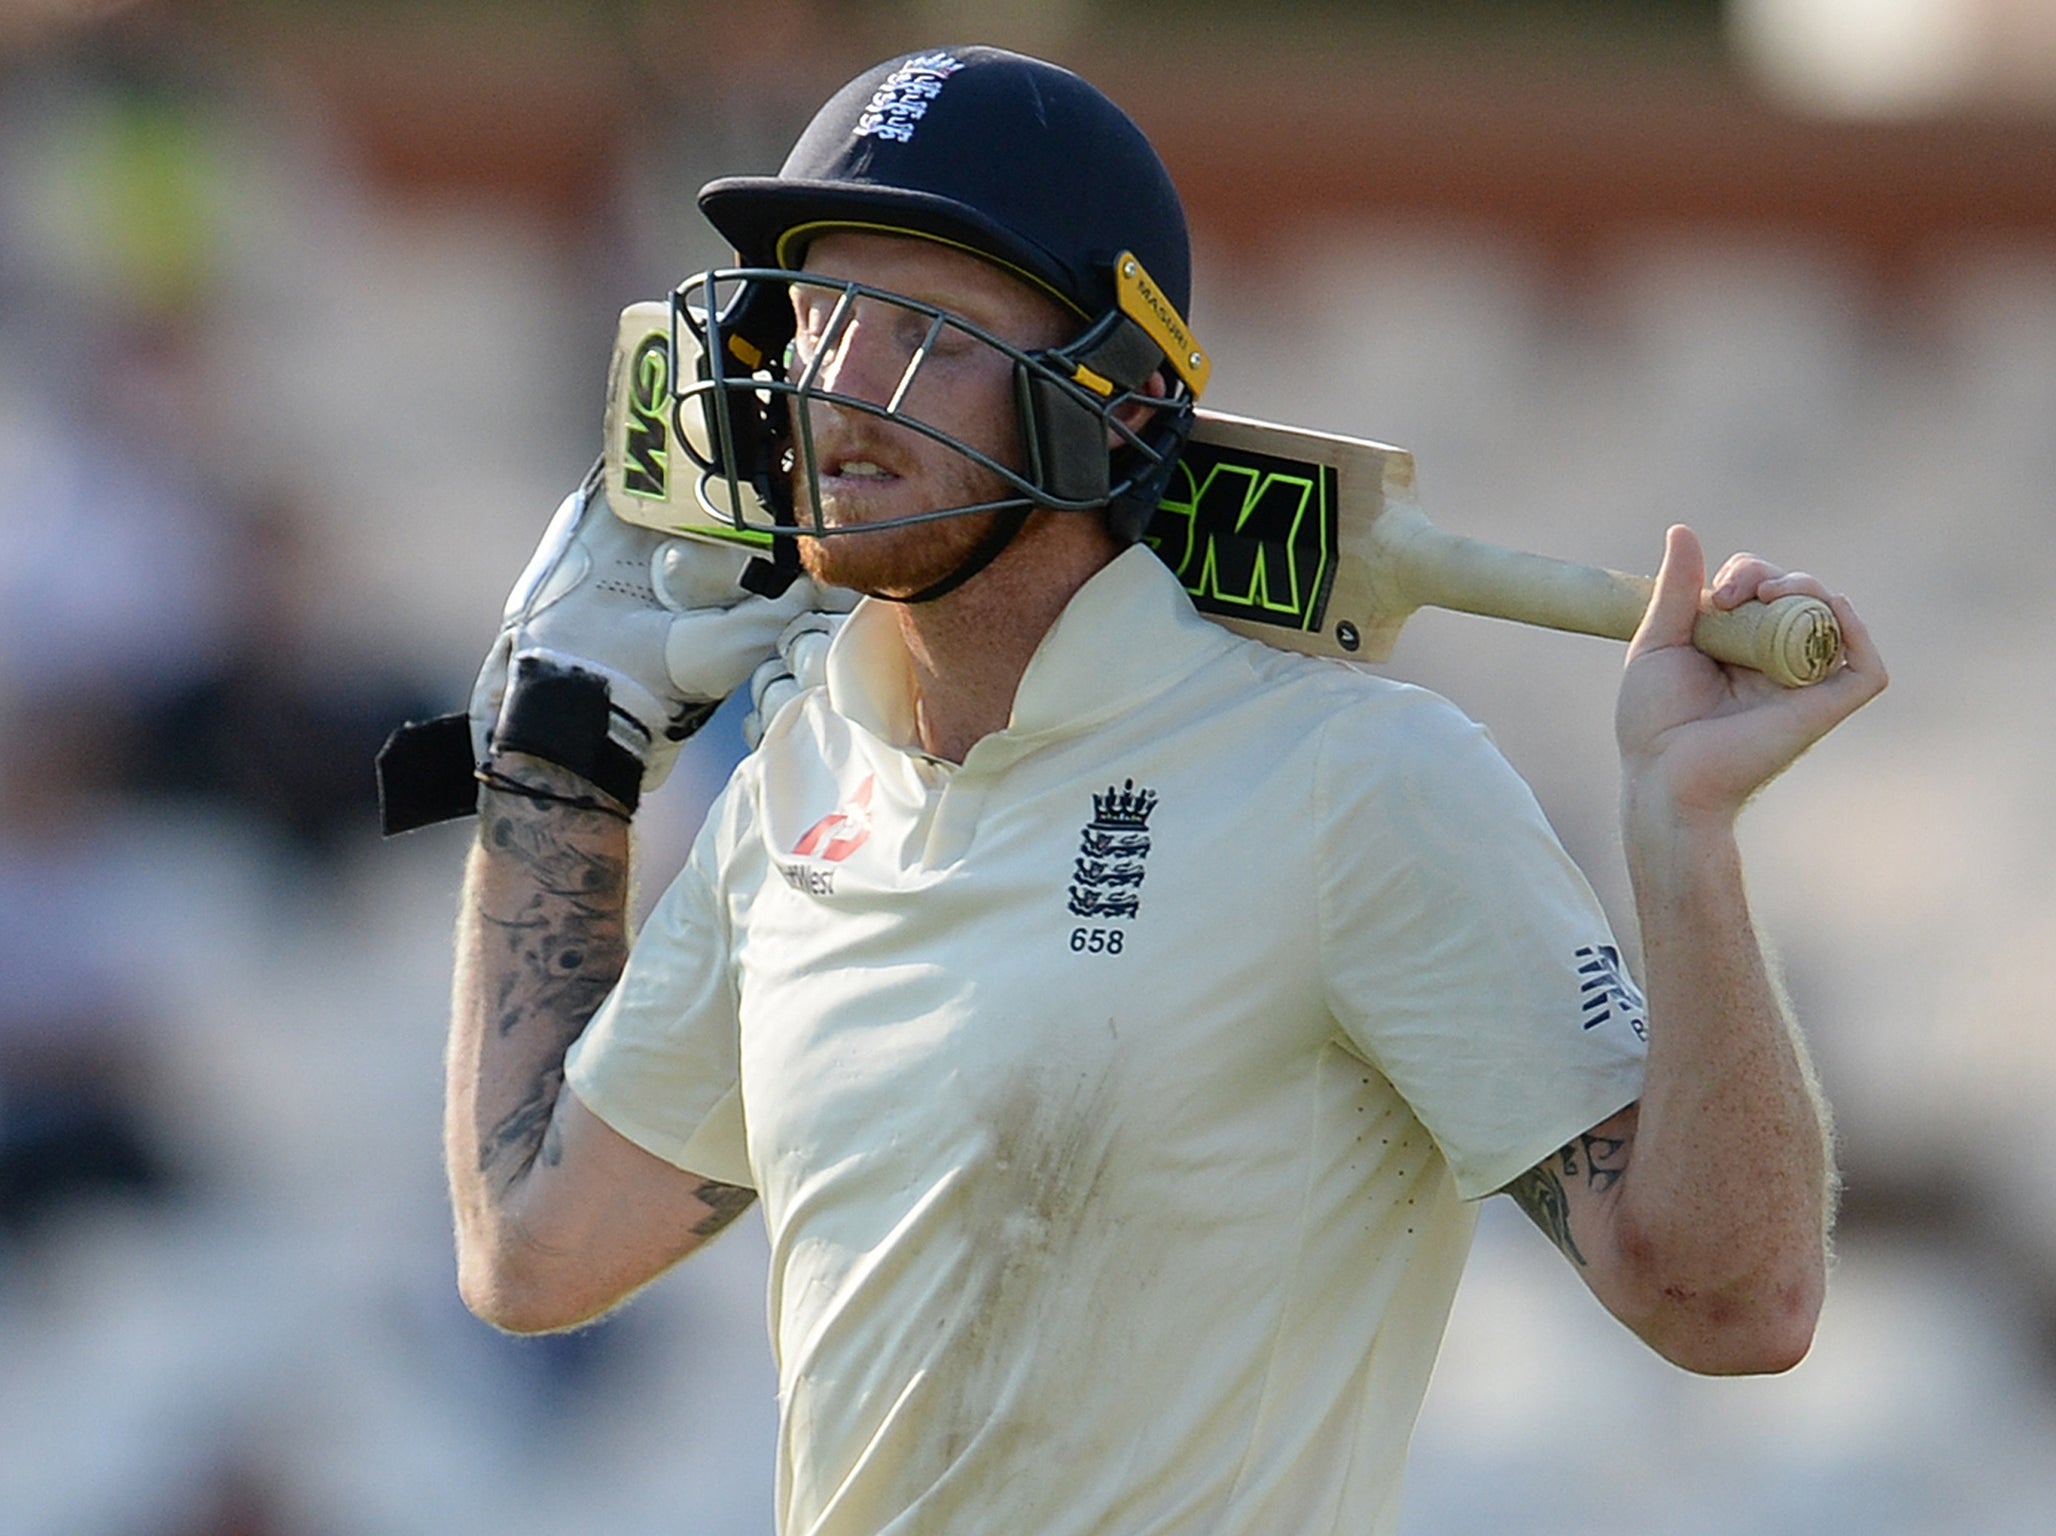 Ben Stokes scored a dogged 50 in his first match for England after being acquitted of affray